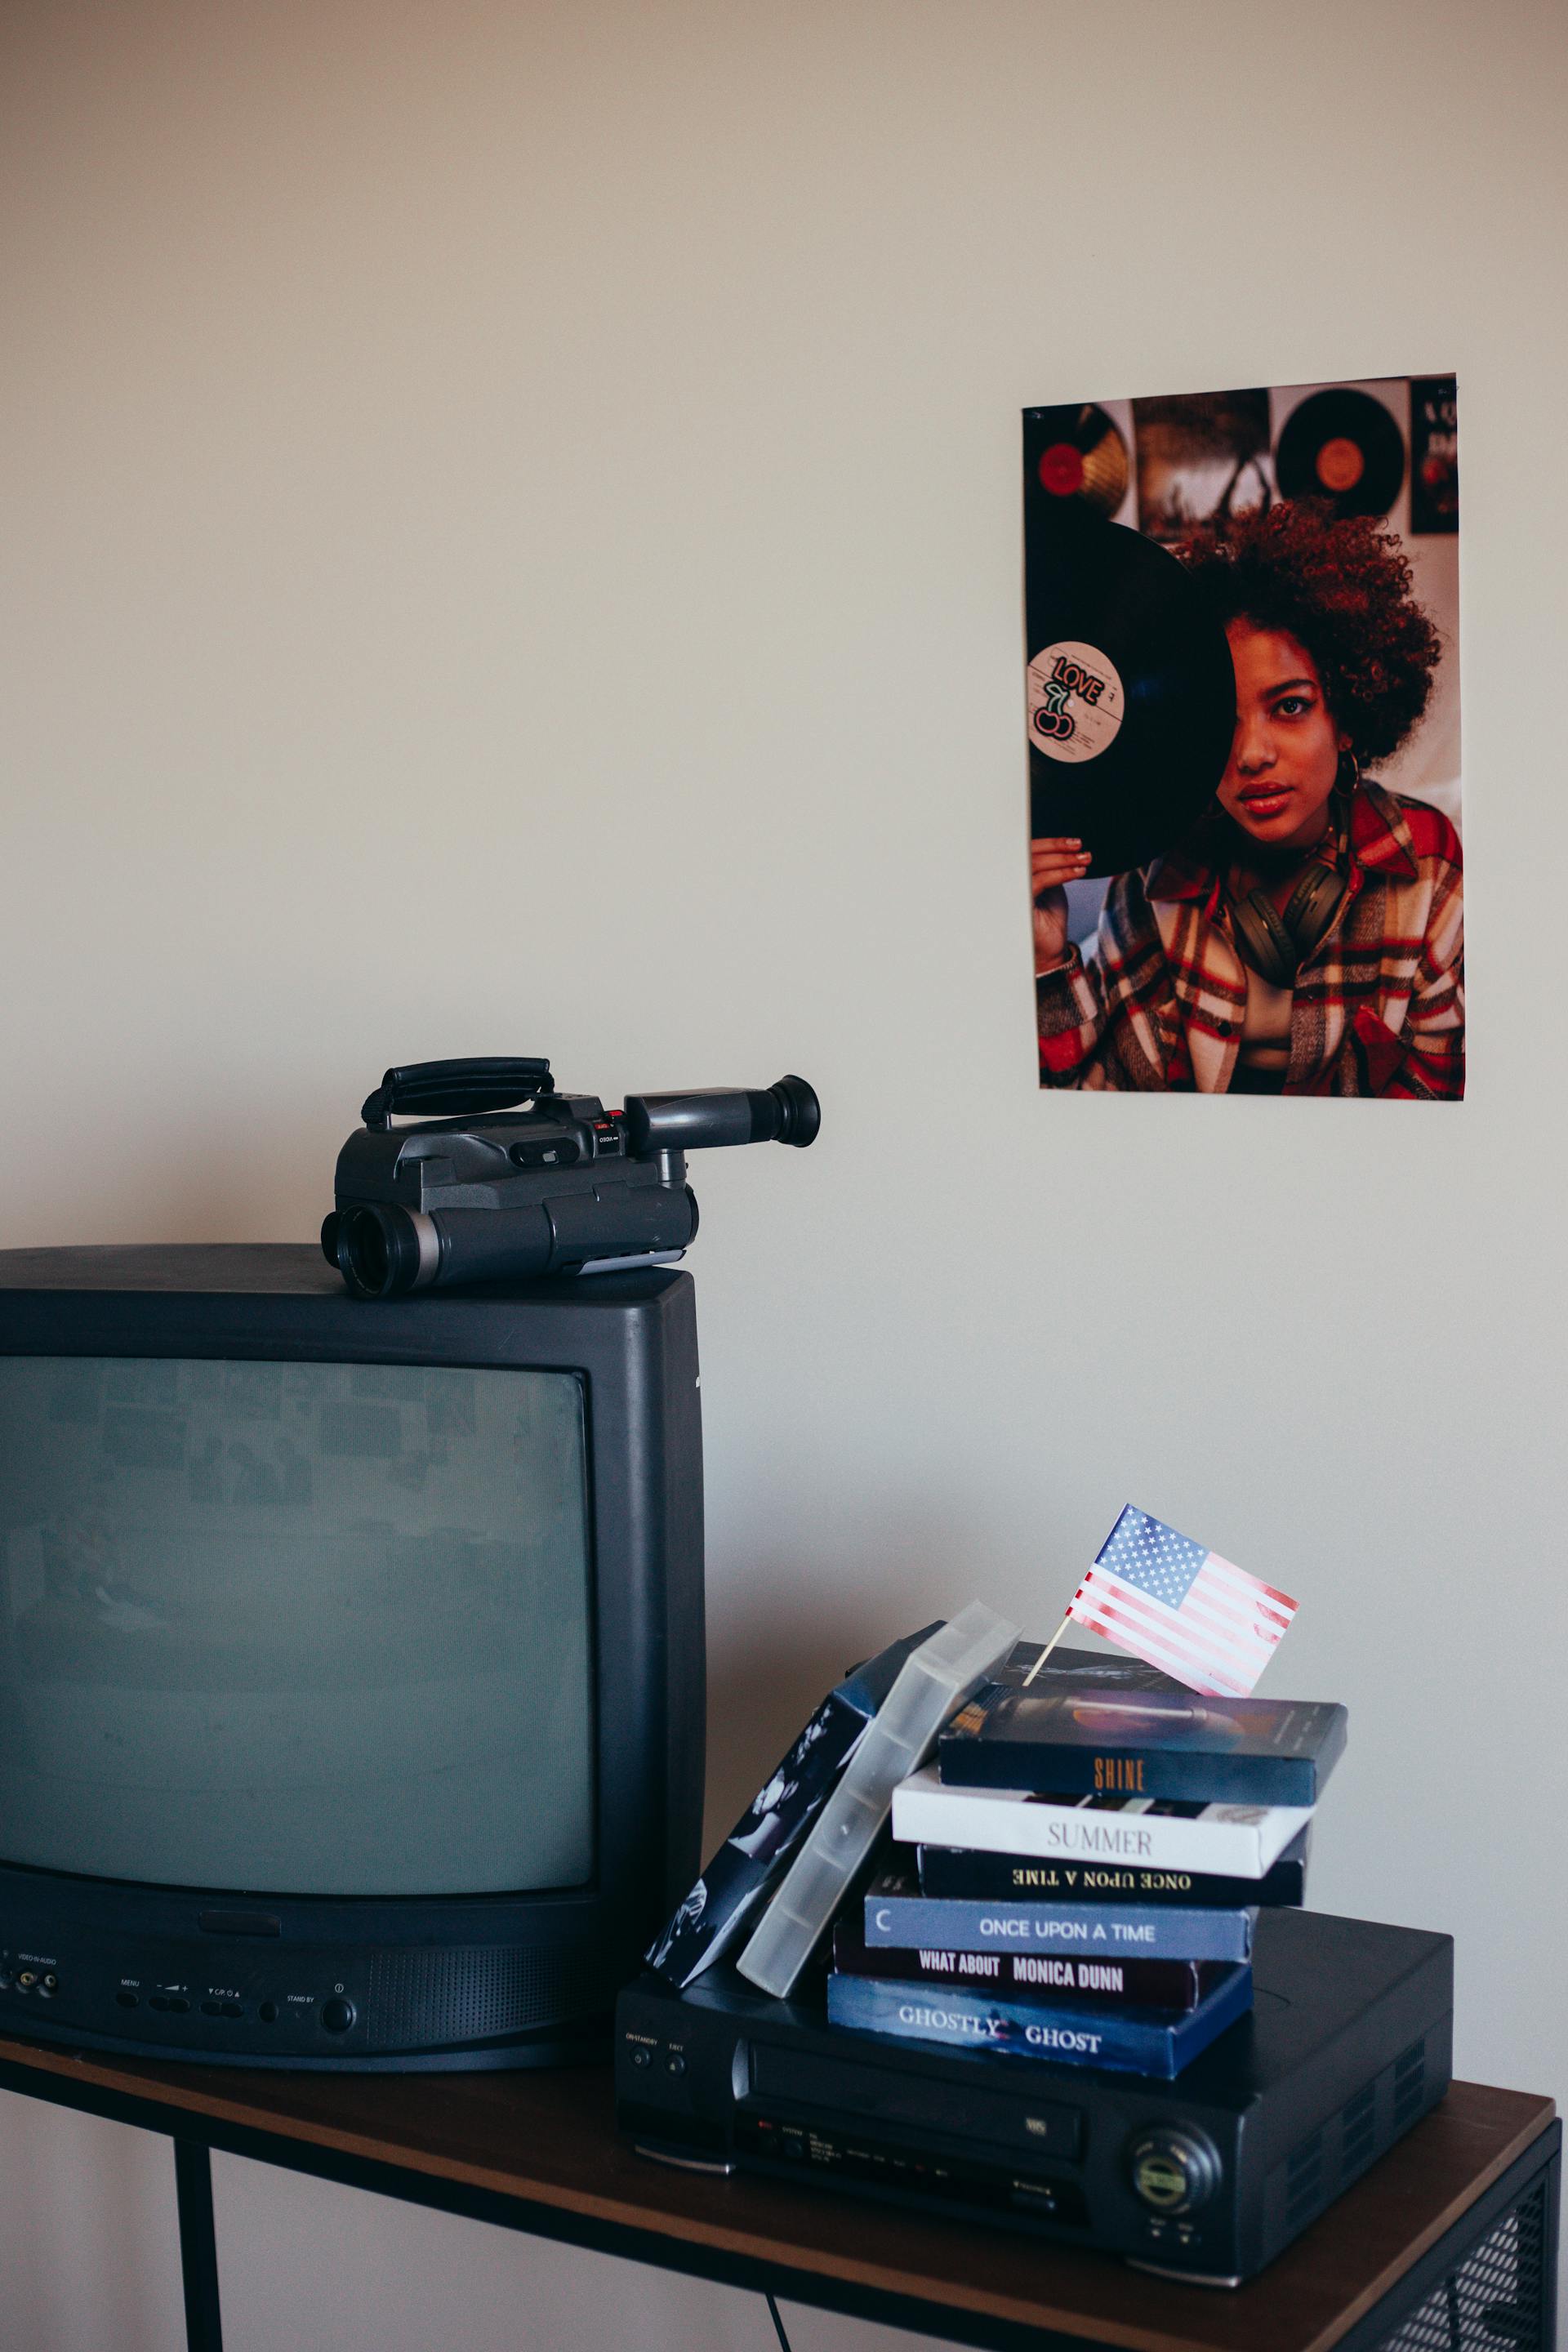 An old TV with cassettes | Source: Pexels